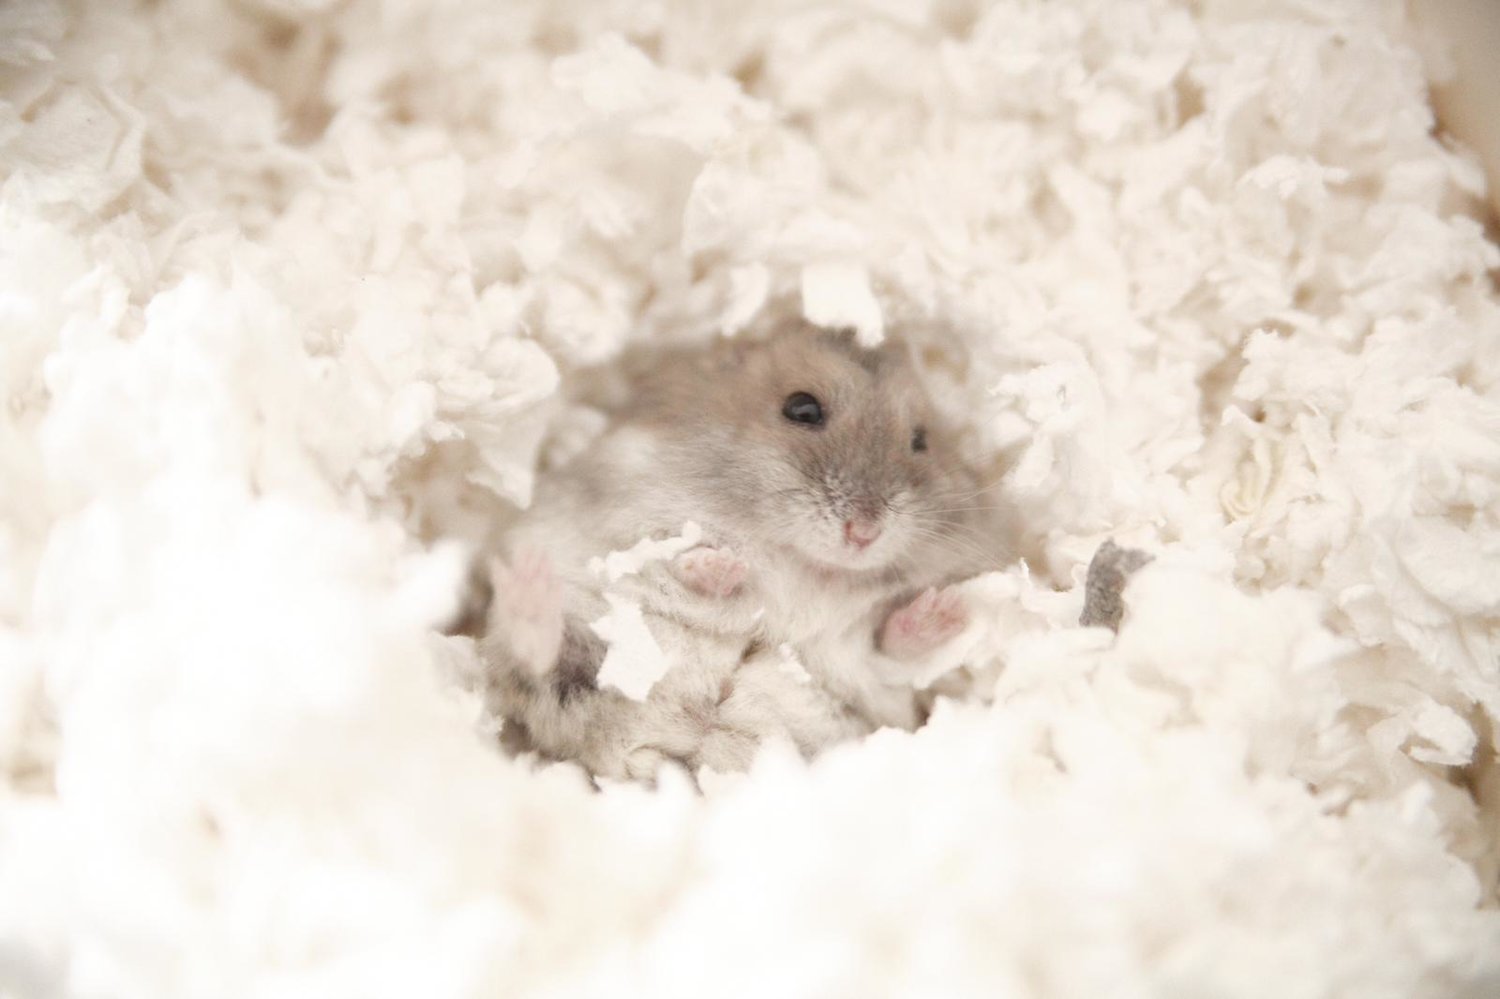 8. Hamsters need both substrate and nesting material in their cages.